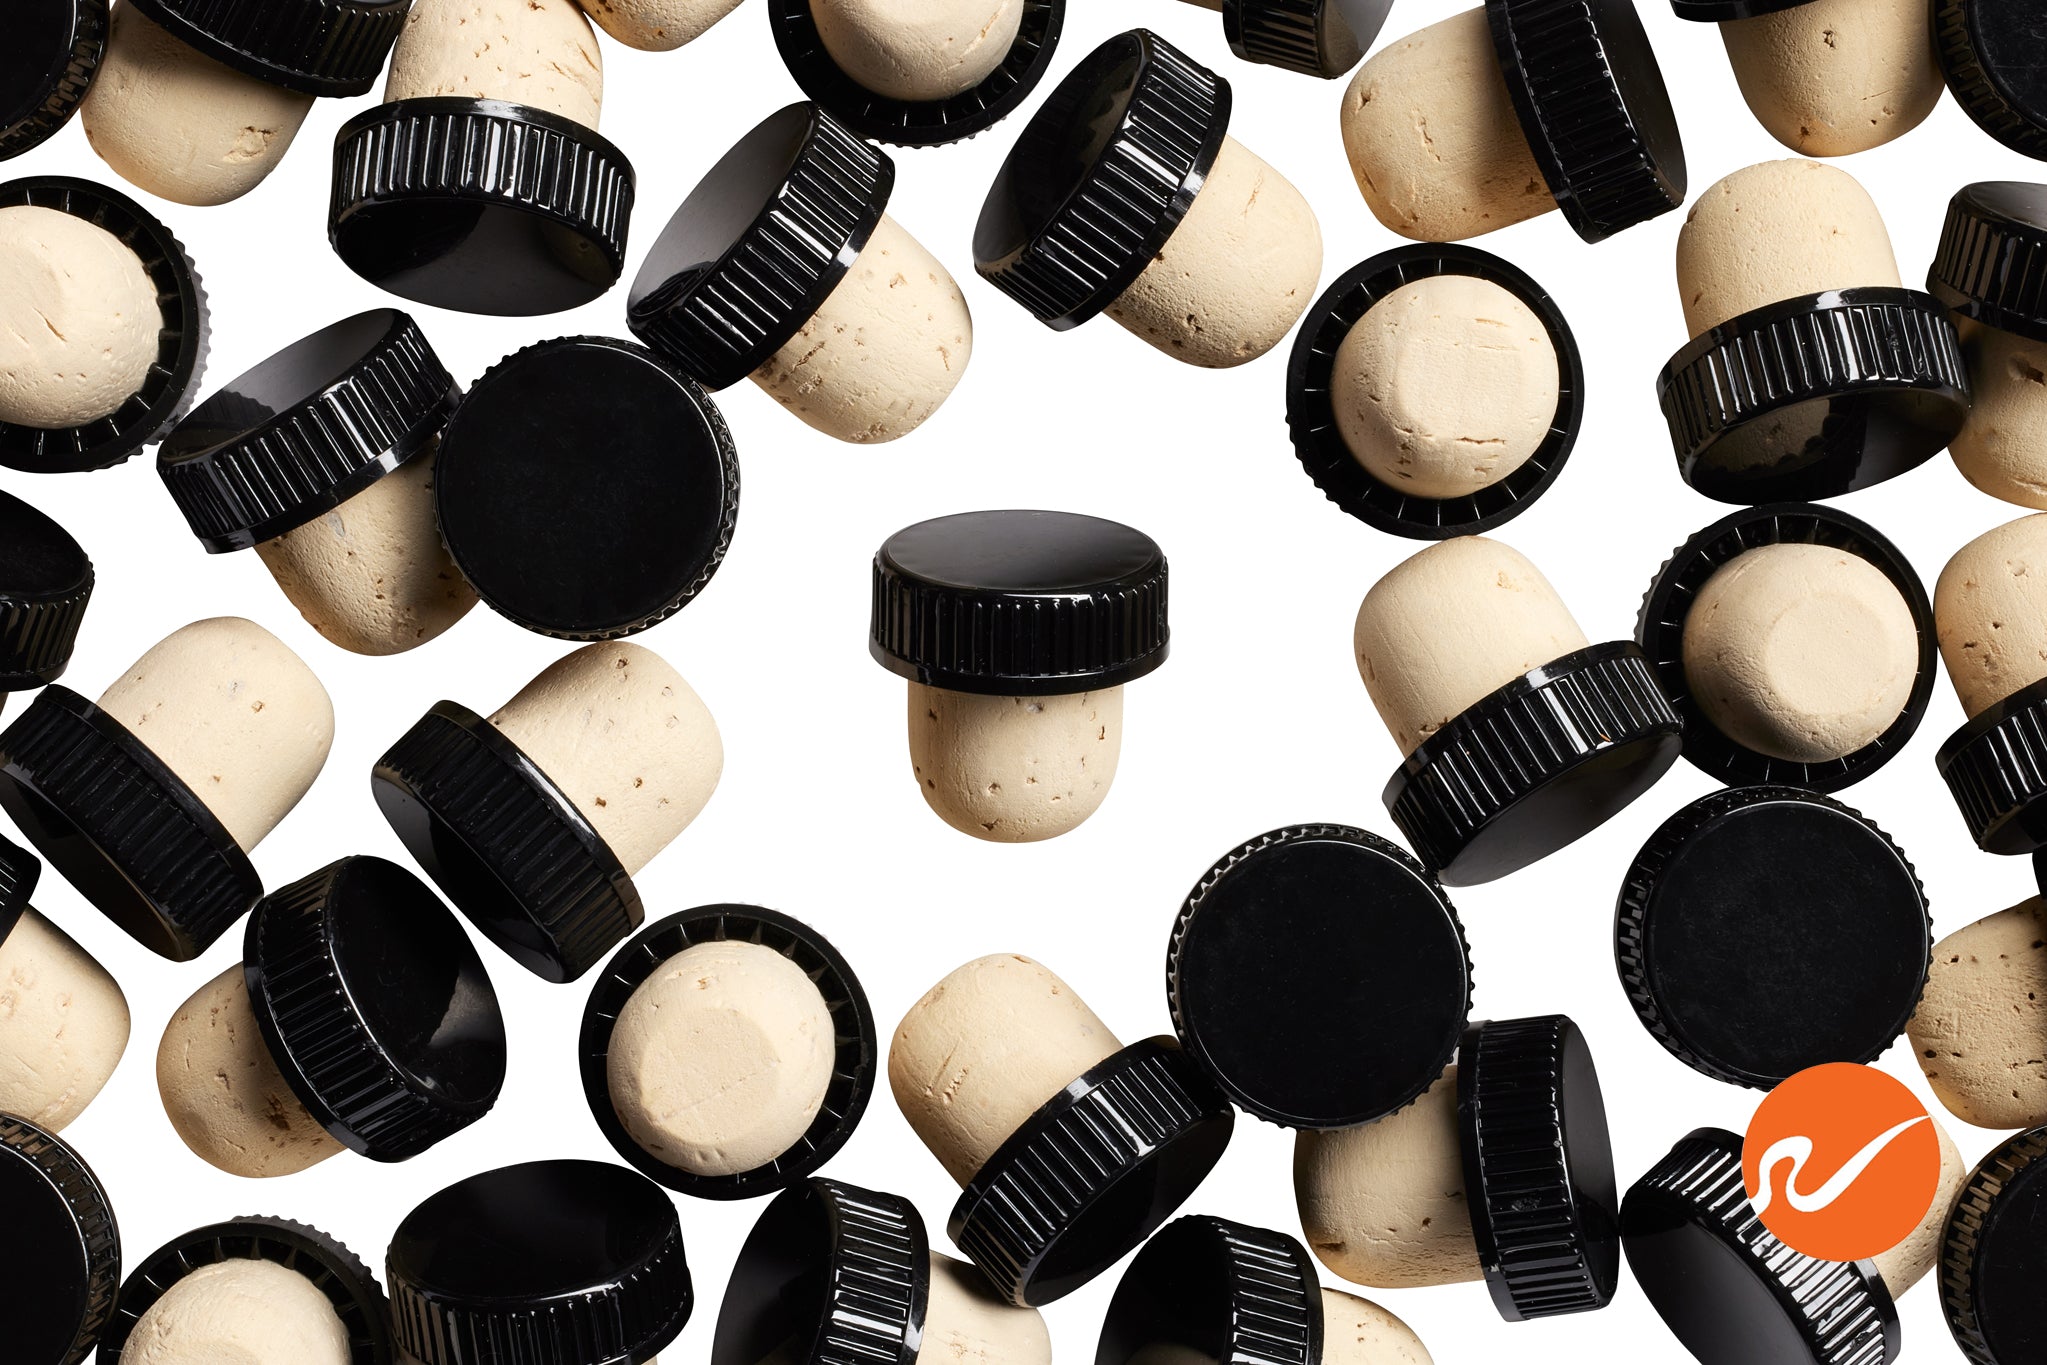 21.5mm Natural T-Corks with Black Tops - WidgetCo